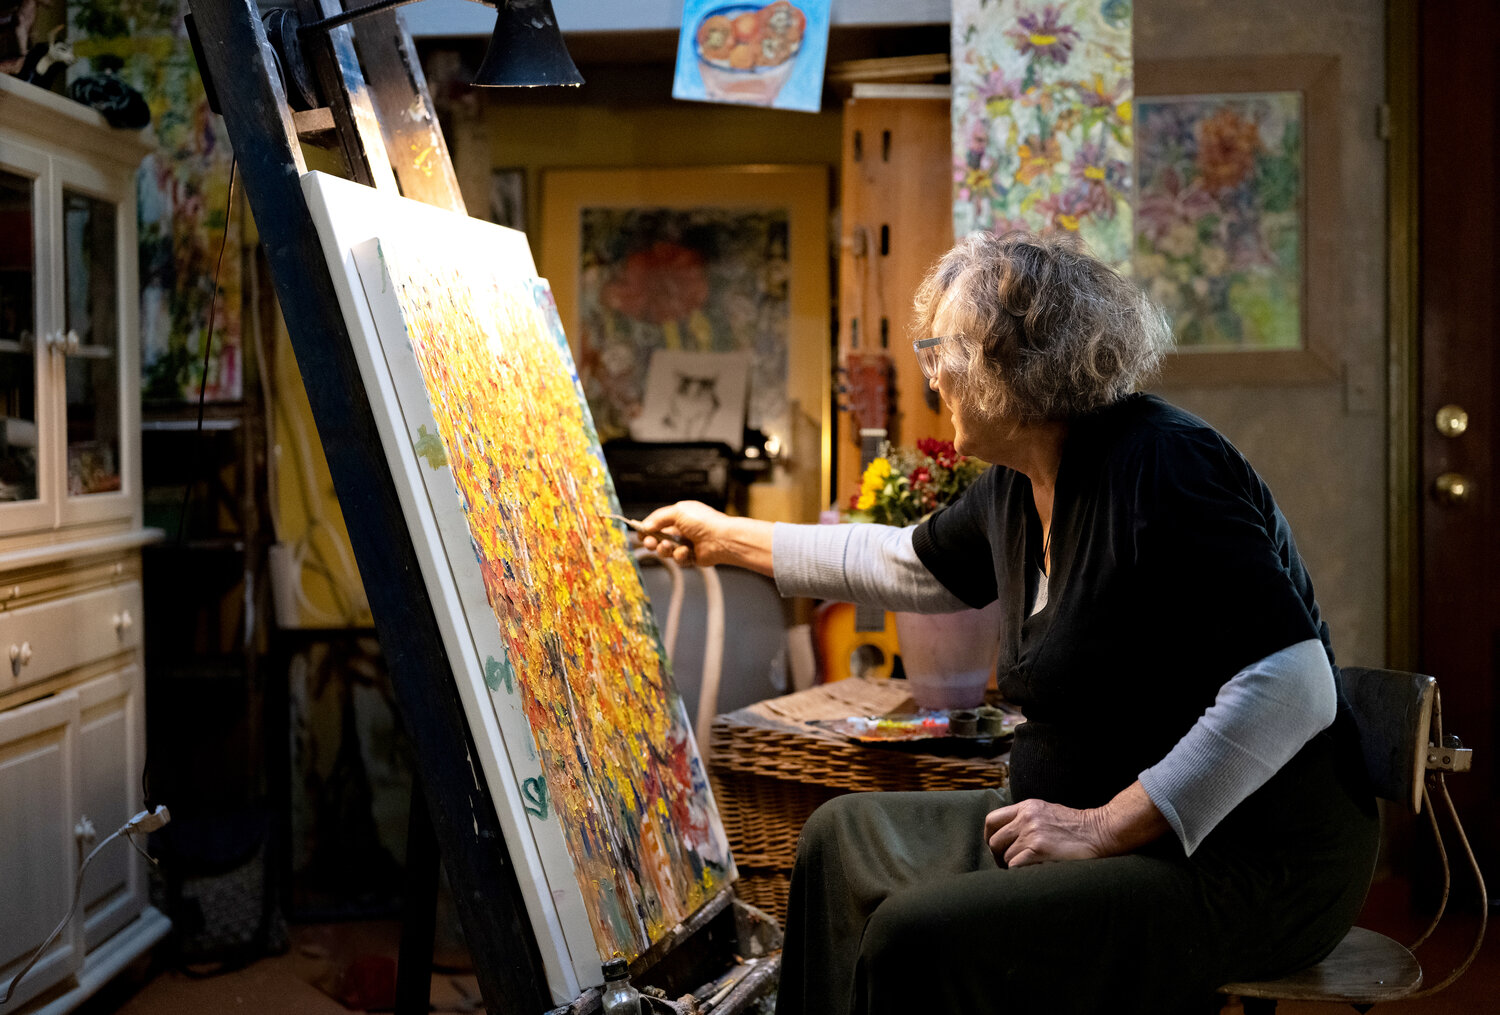 Tweed Meyer works on an oil painting inspired by the colors of autumn.